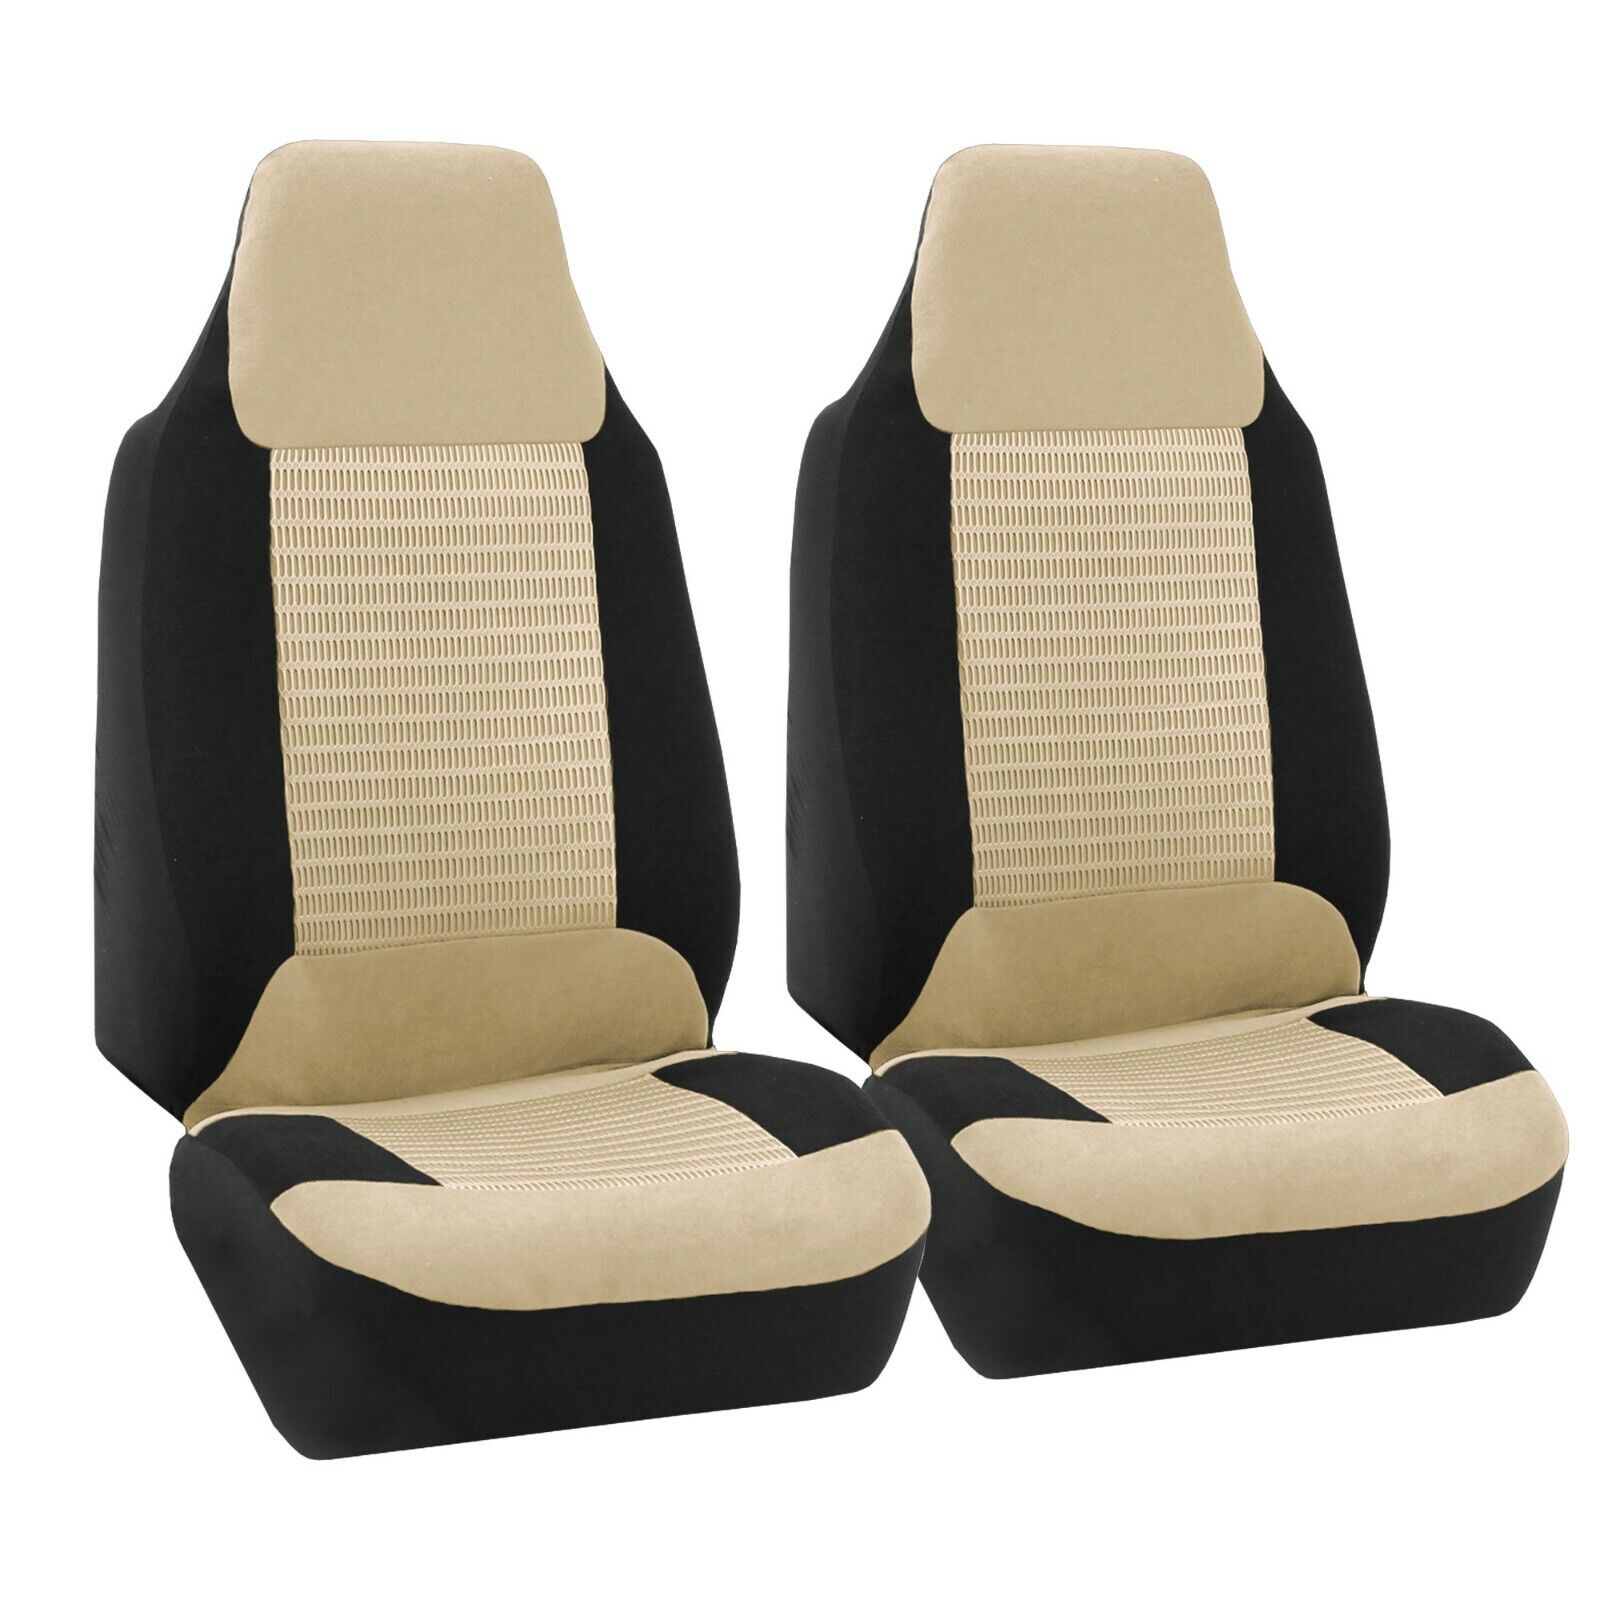 High Back Bucket Seat Premium Fabric Car Seat Covers Front Set Universal Fit